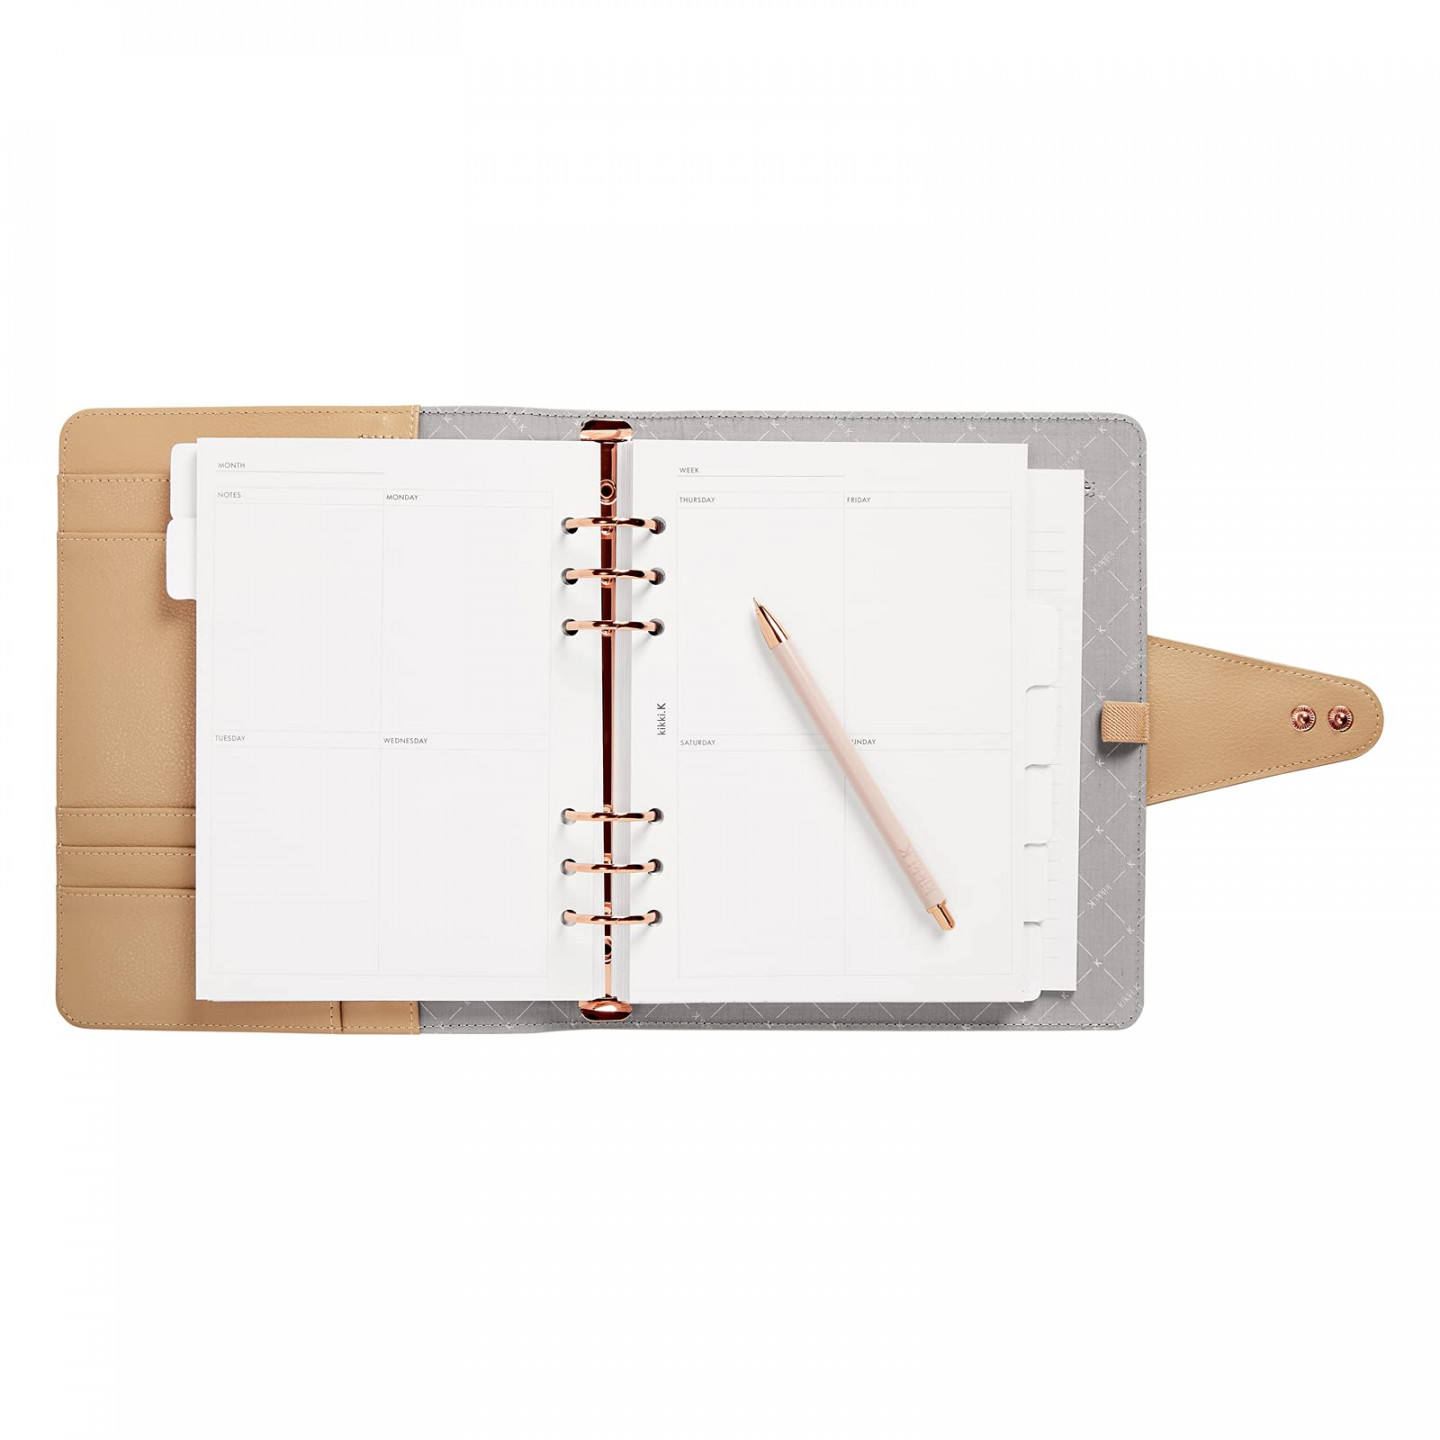 kikki.K Signature Edition Collection - A Leather Personal Planner in  Birch, Undated Weekly & MonthlSee more kikki